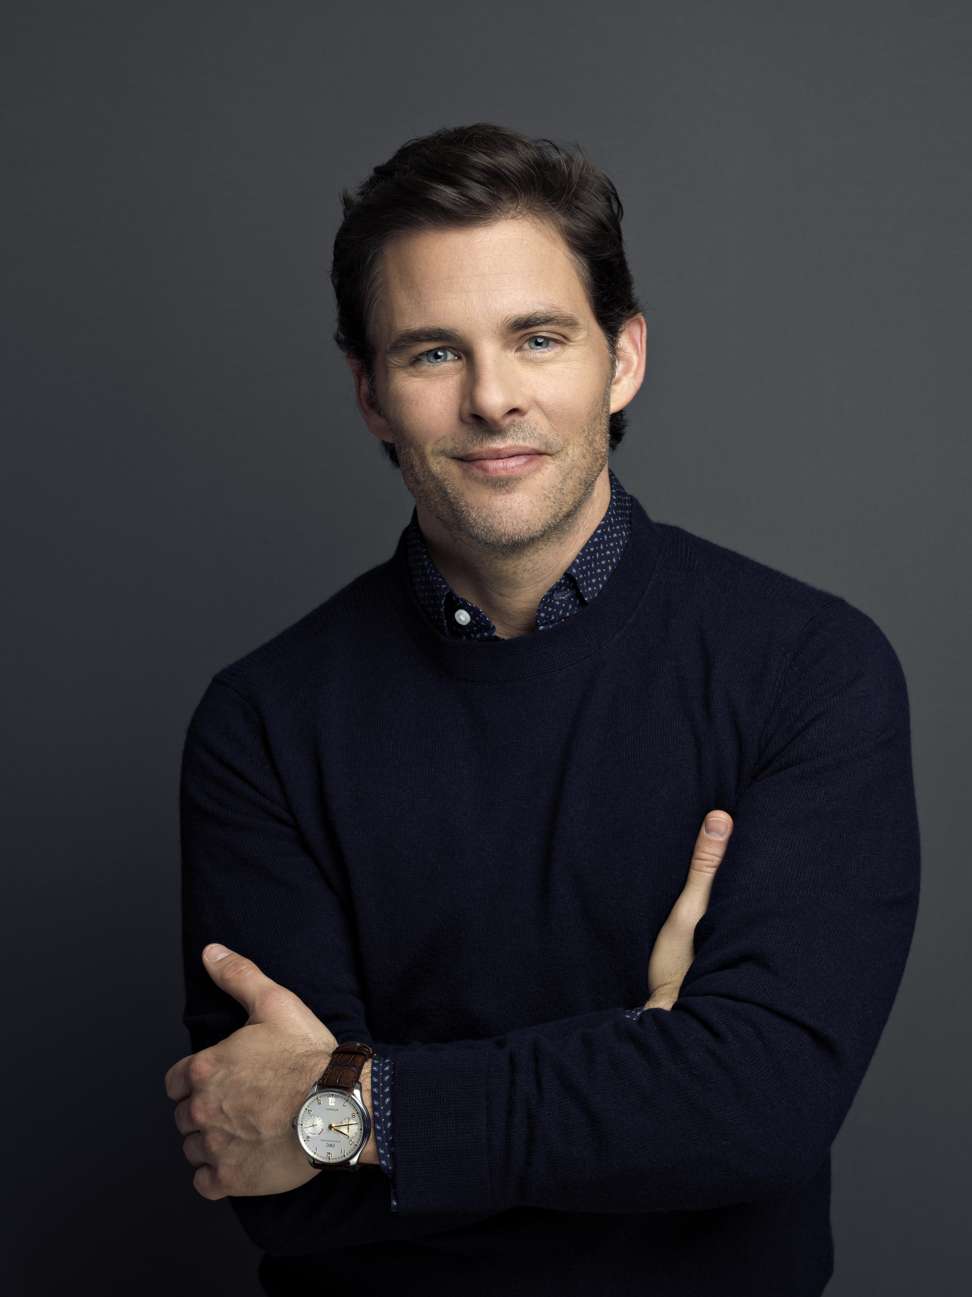 James Marsden does not care about the genre of a film. He says it’s always about the role and who is directing the story being told. The star was in Geneva for IWC’s stellar party during SIHH.